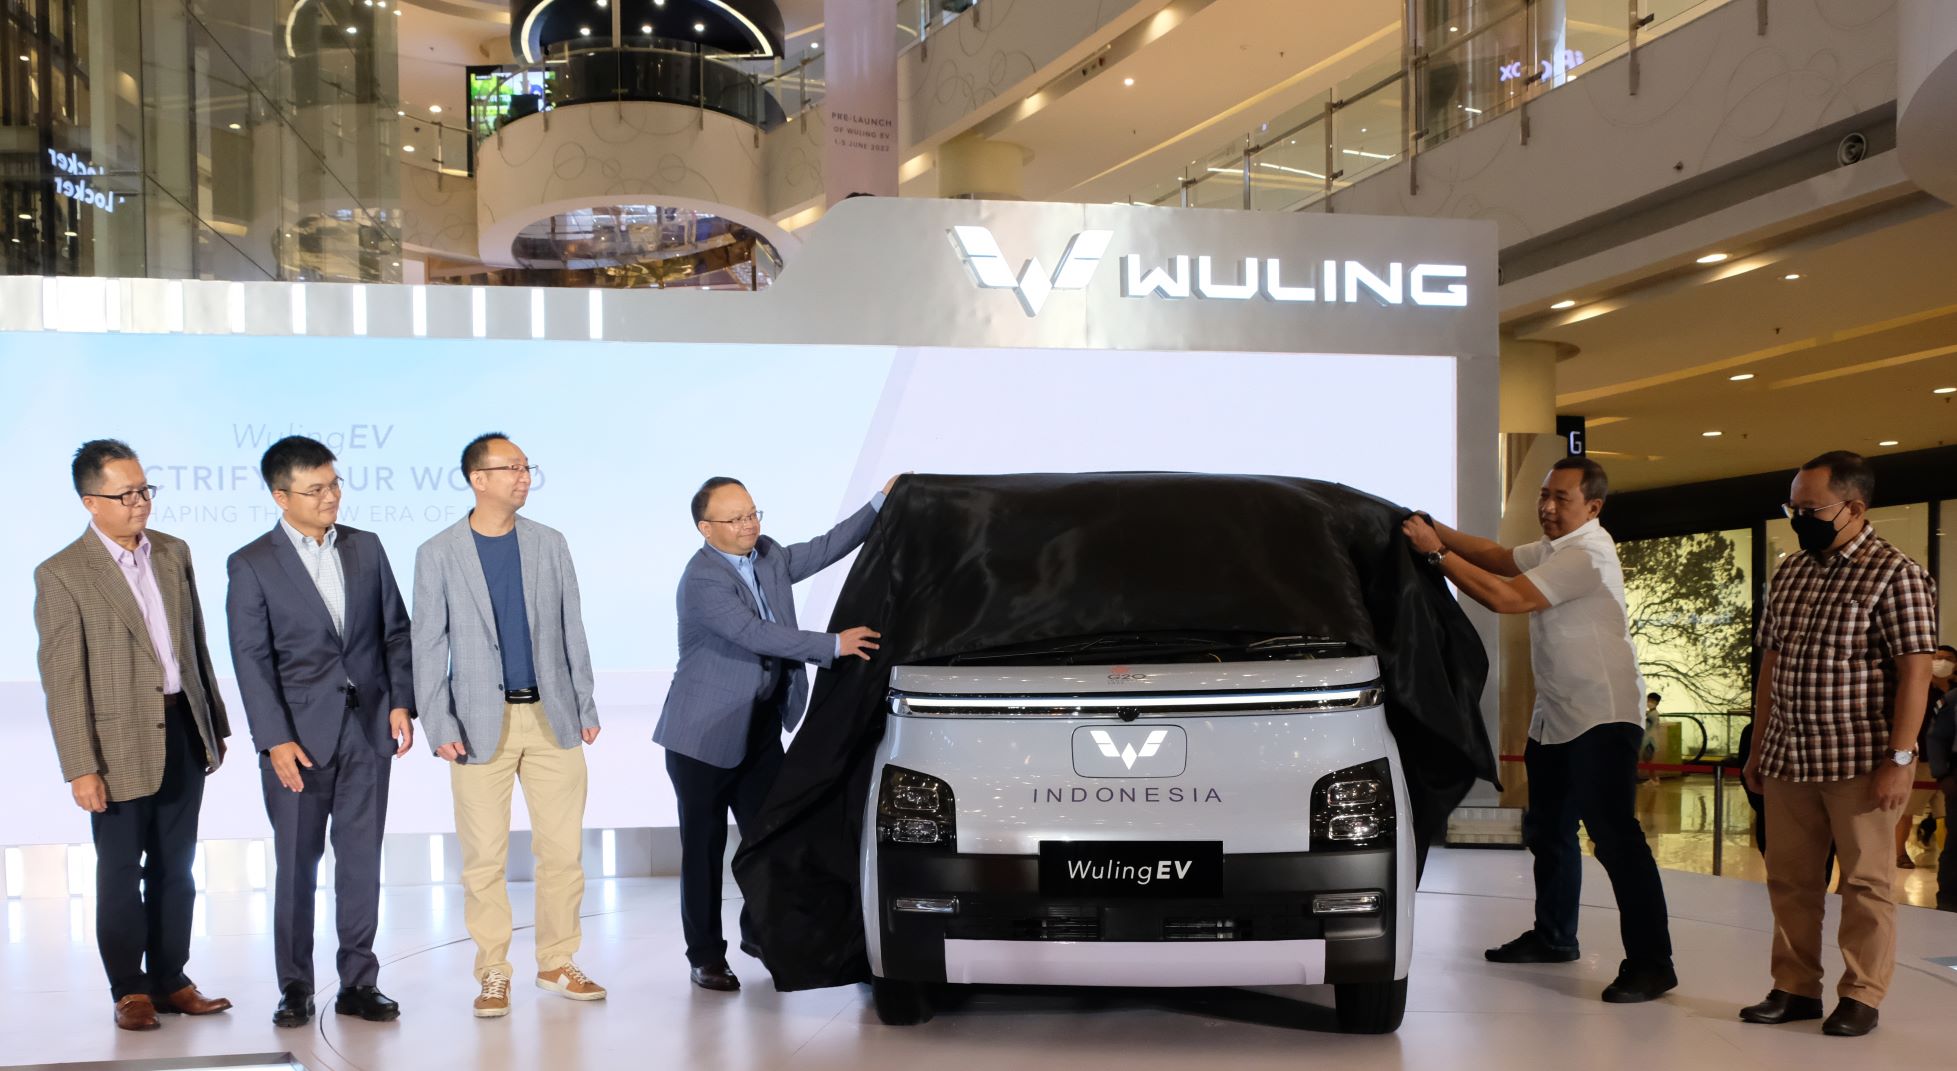 Image Wuling EV Officially Becomes the Official Car Partner of the G20 Summit